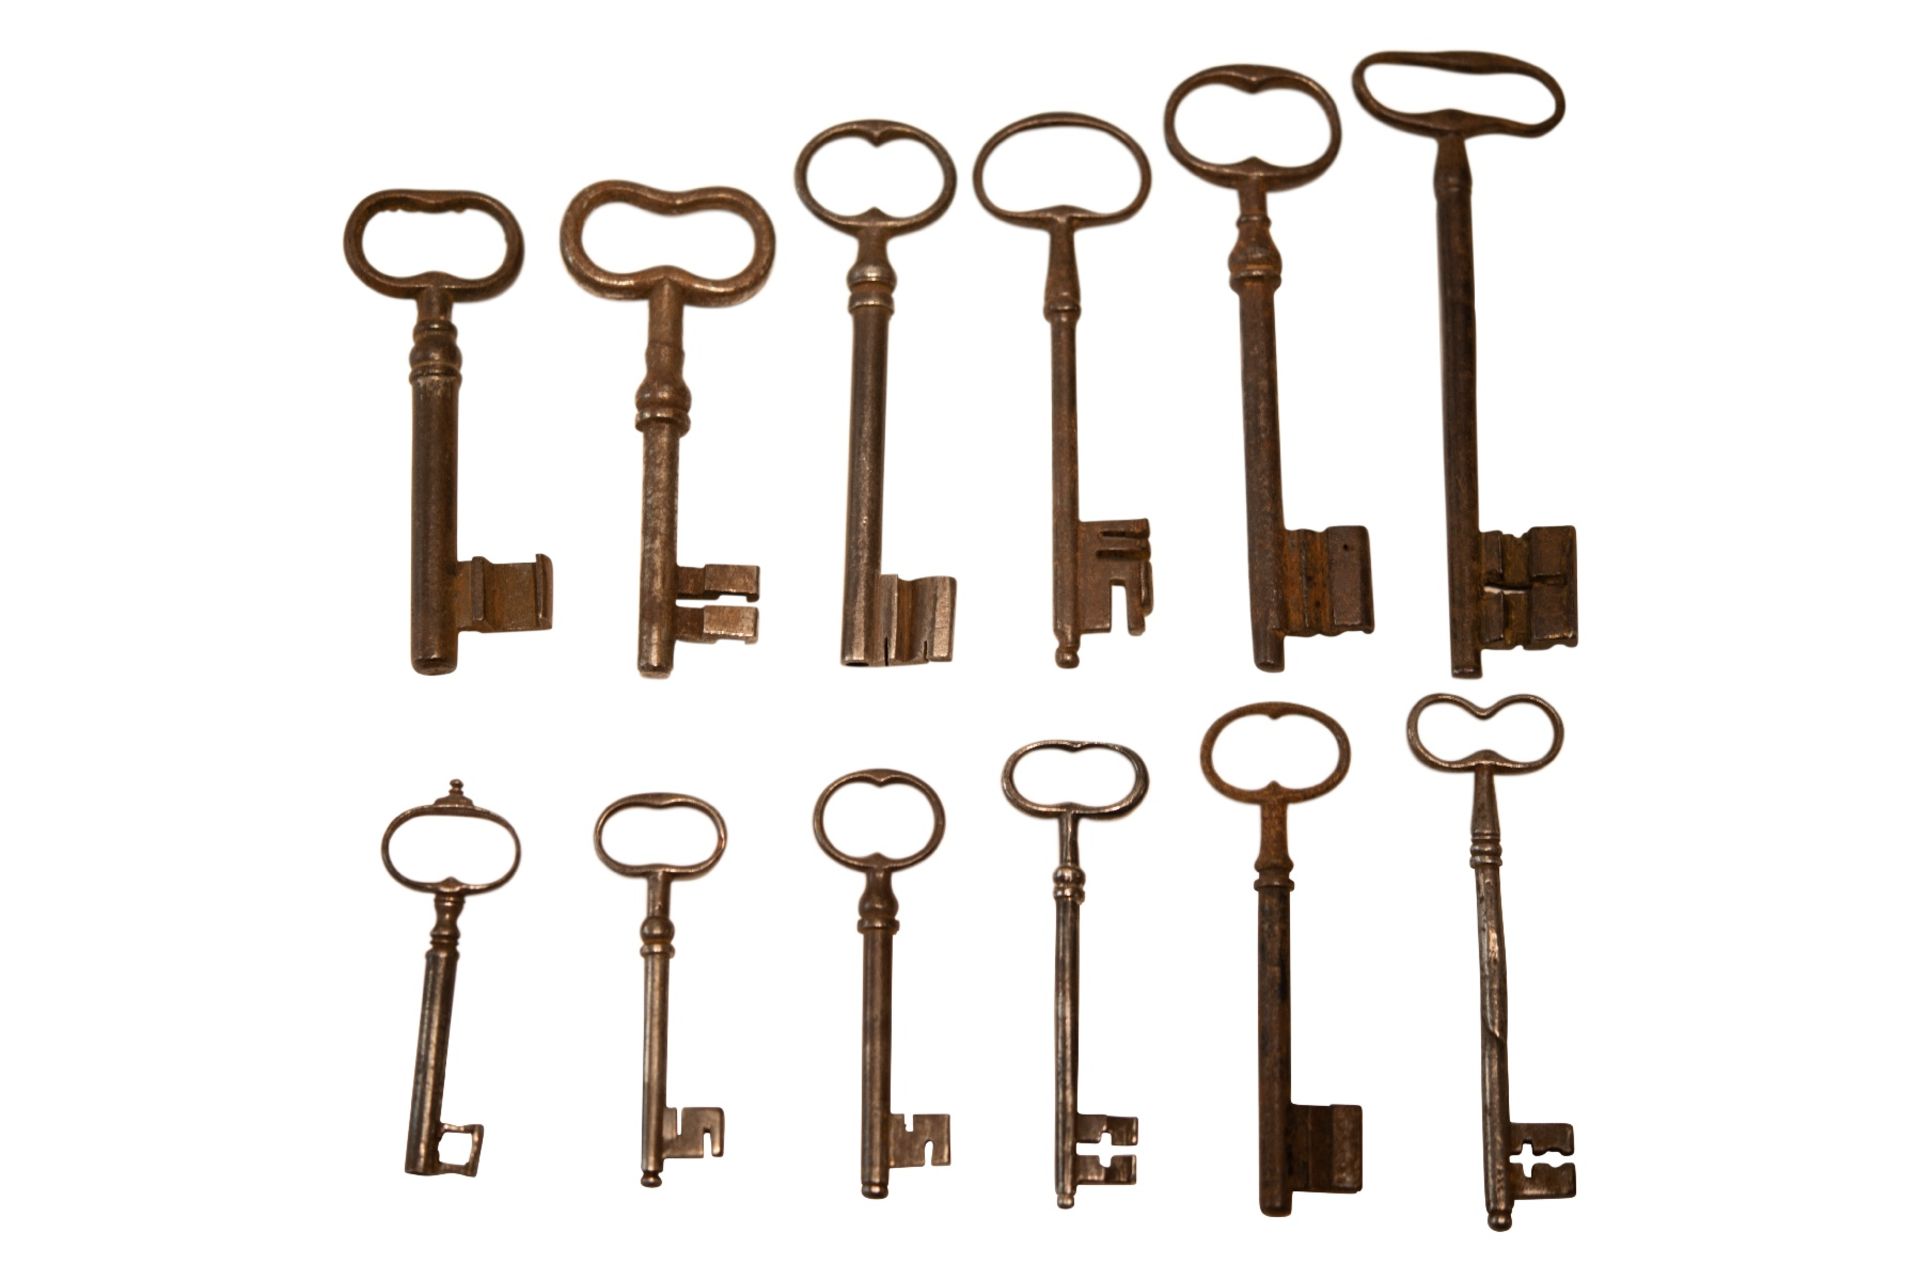 Old key collection - Image 2 of 2